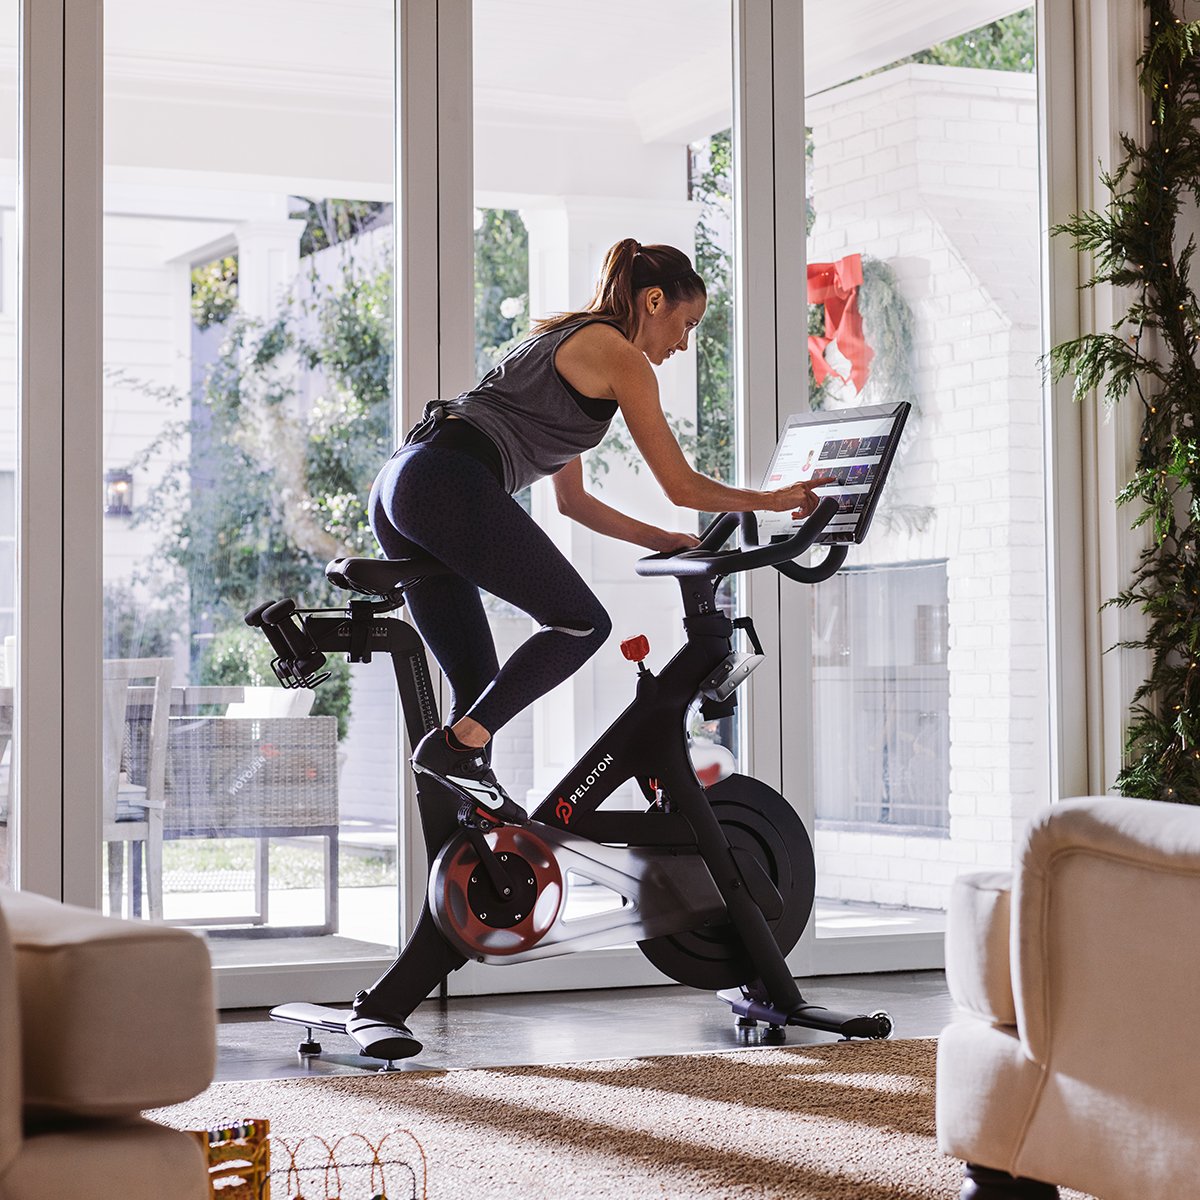 Peloton on Twitter: "Give it all in time for the holidays. Get